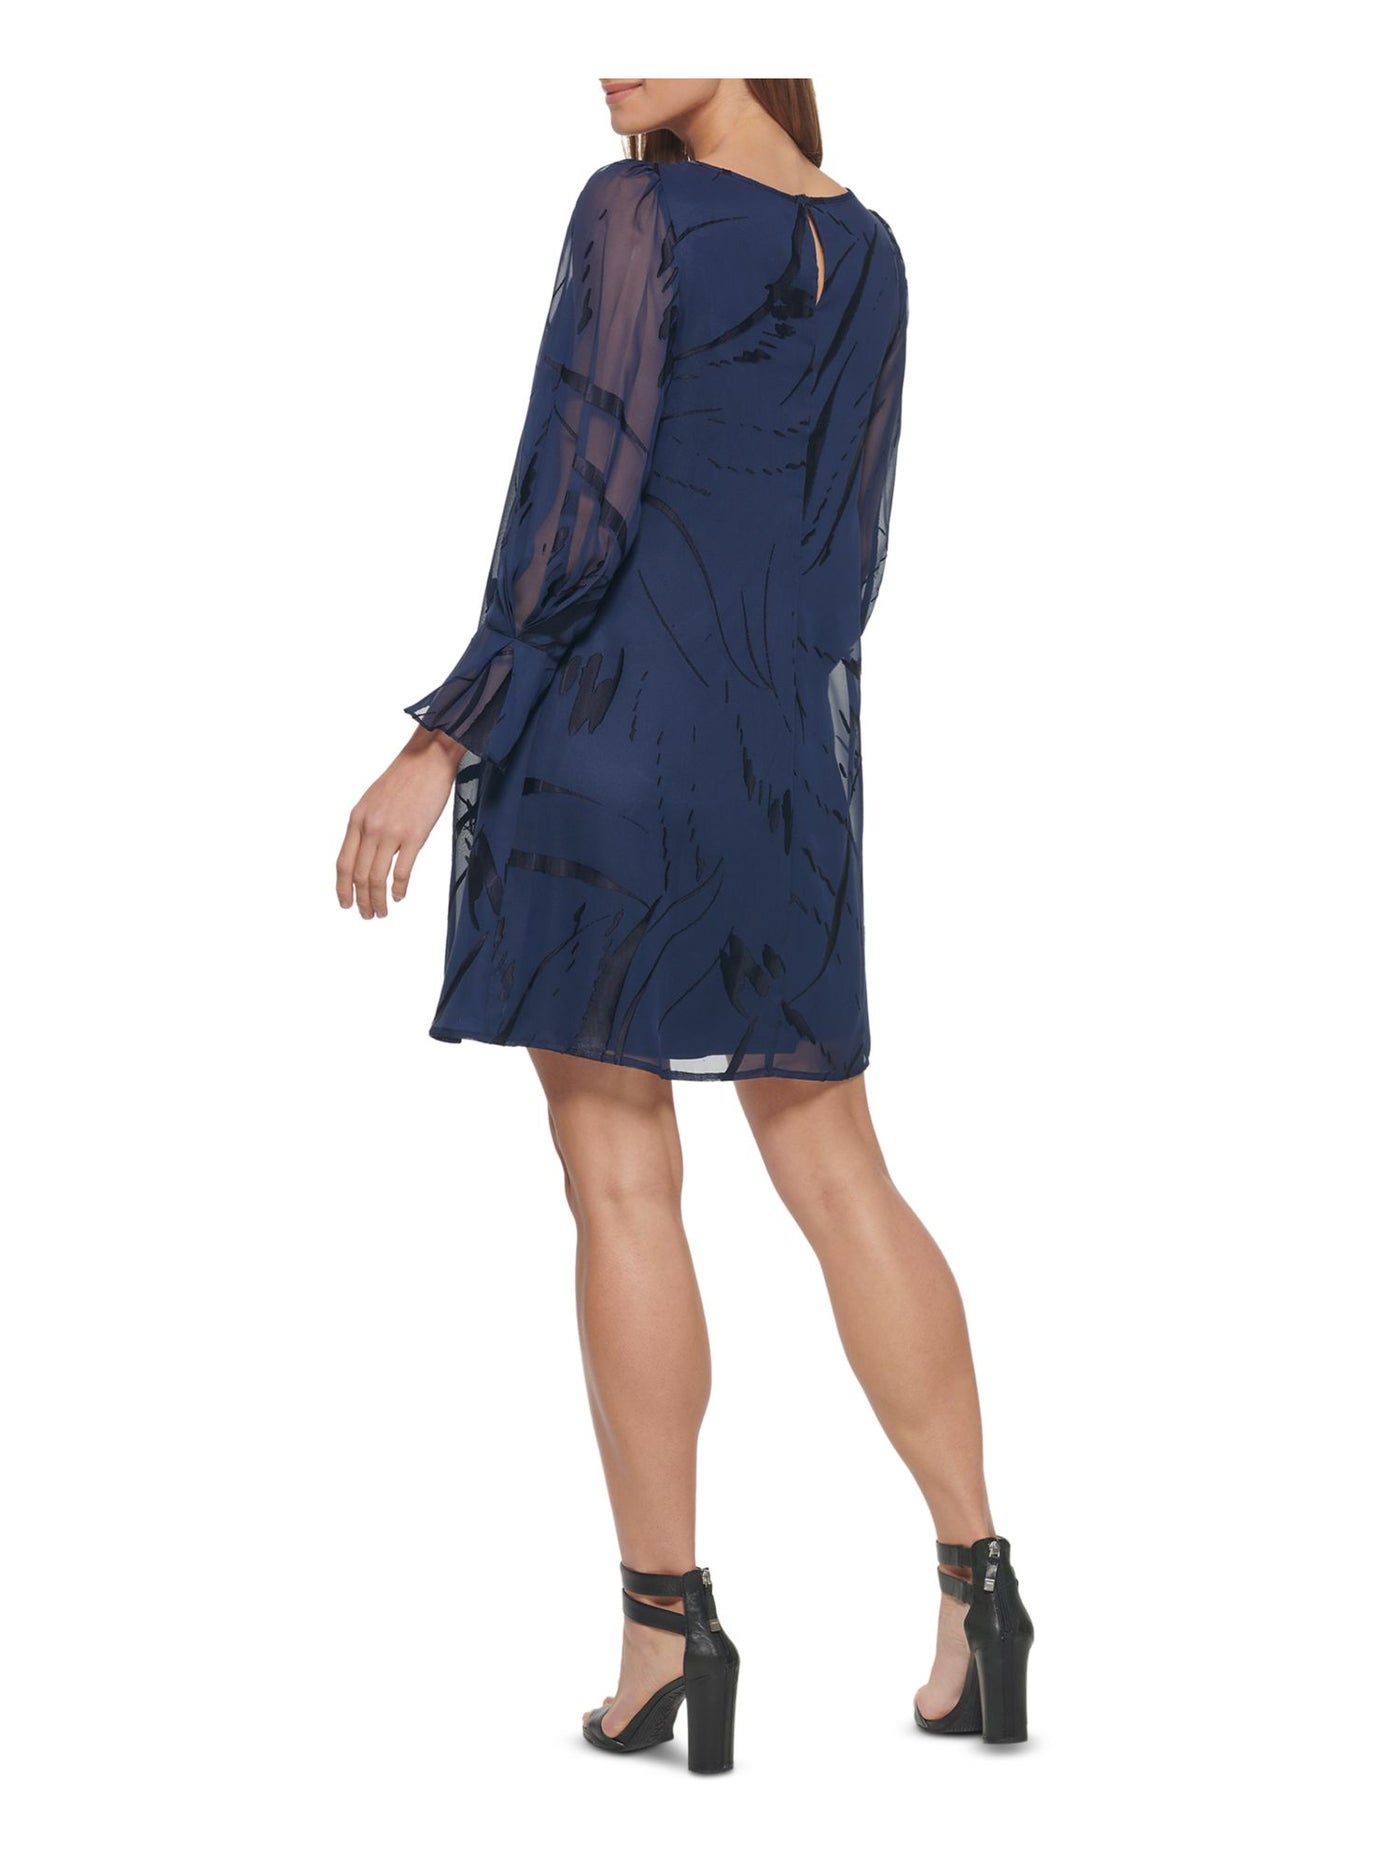 DKNY Womens Navy Sheer Lined Long Sleeve Boat Neck Above The Knee Cocktail Trapeze Dress 2